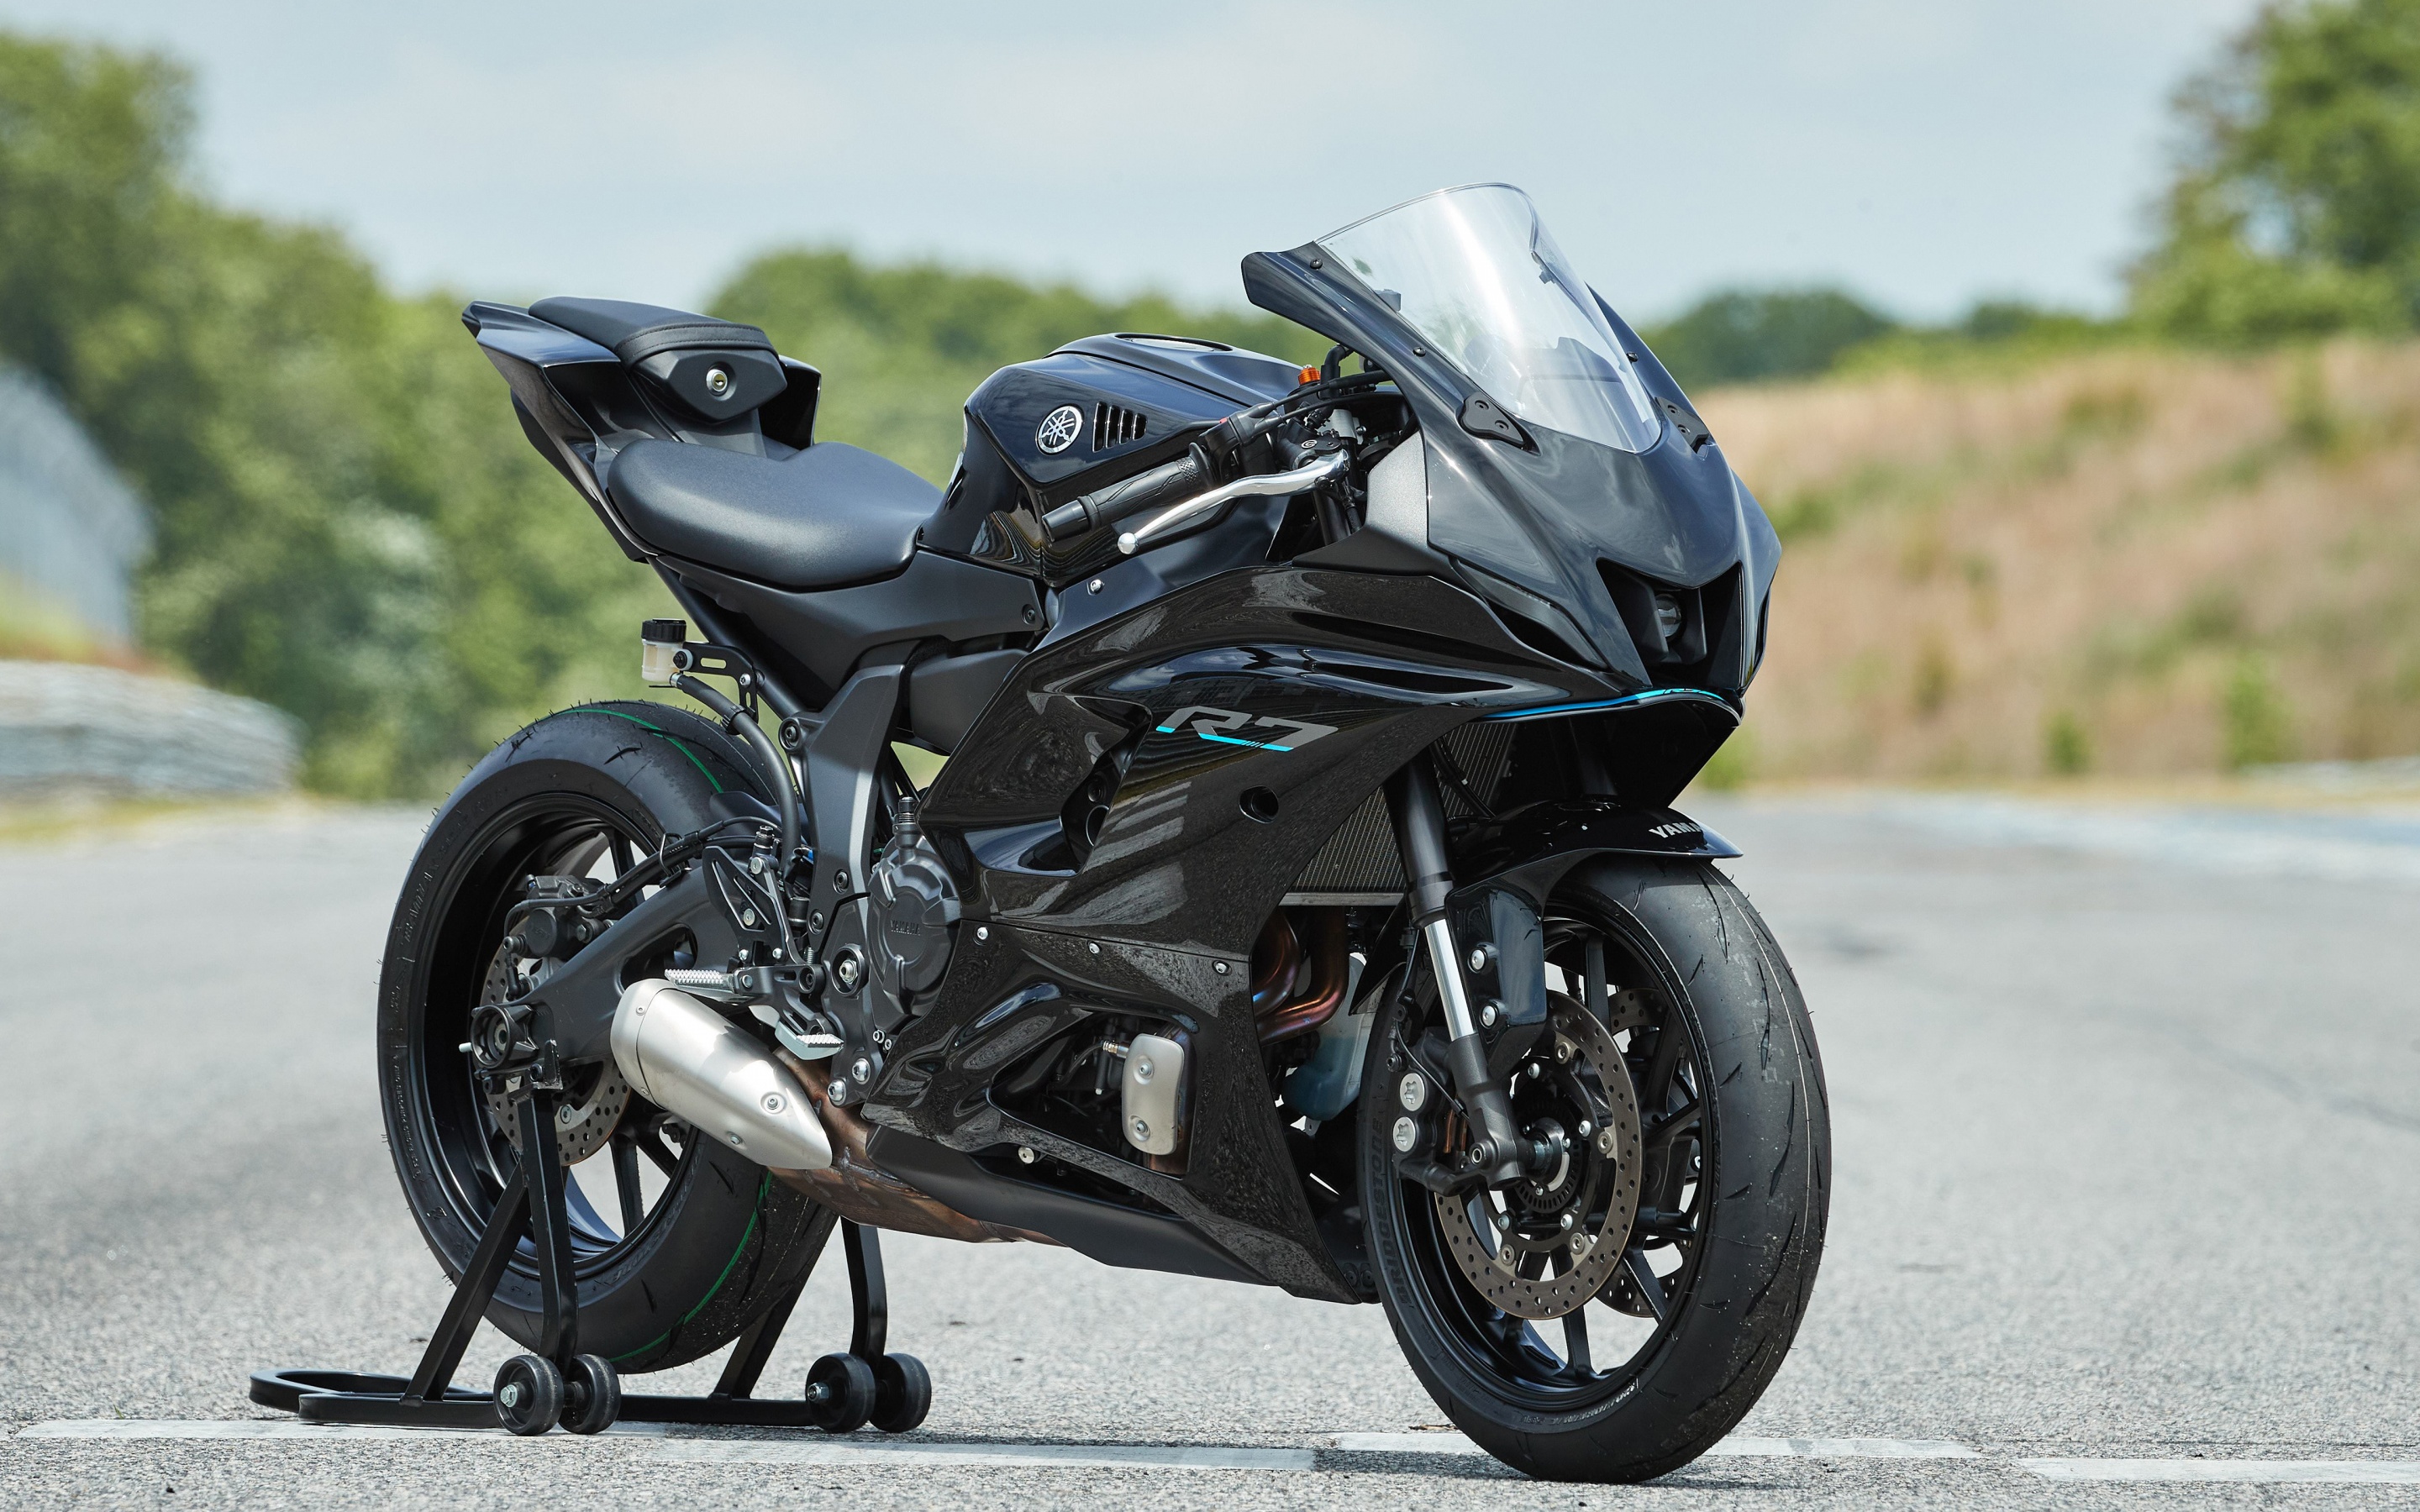 Desktop Images Of Yamaha YZF-R7 In 1080p